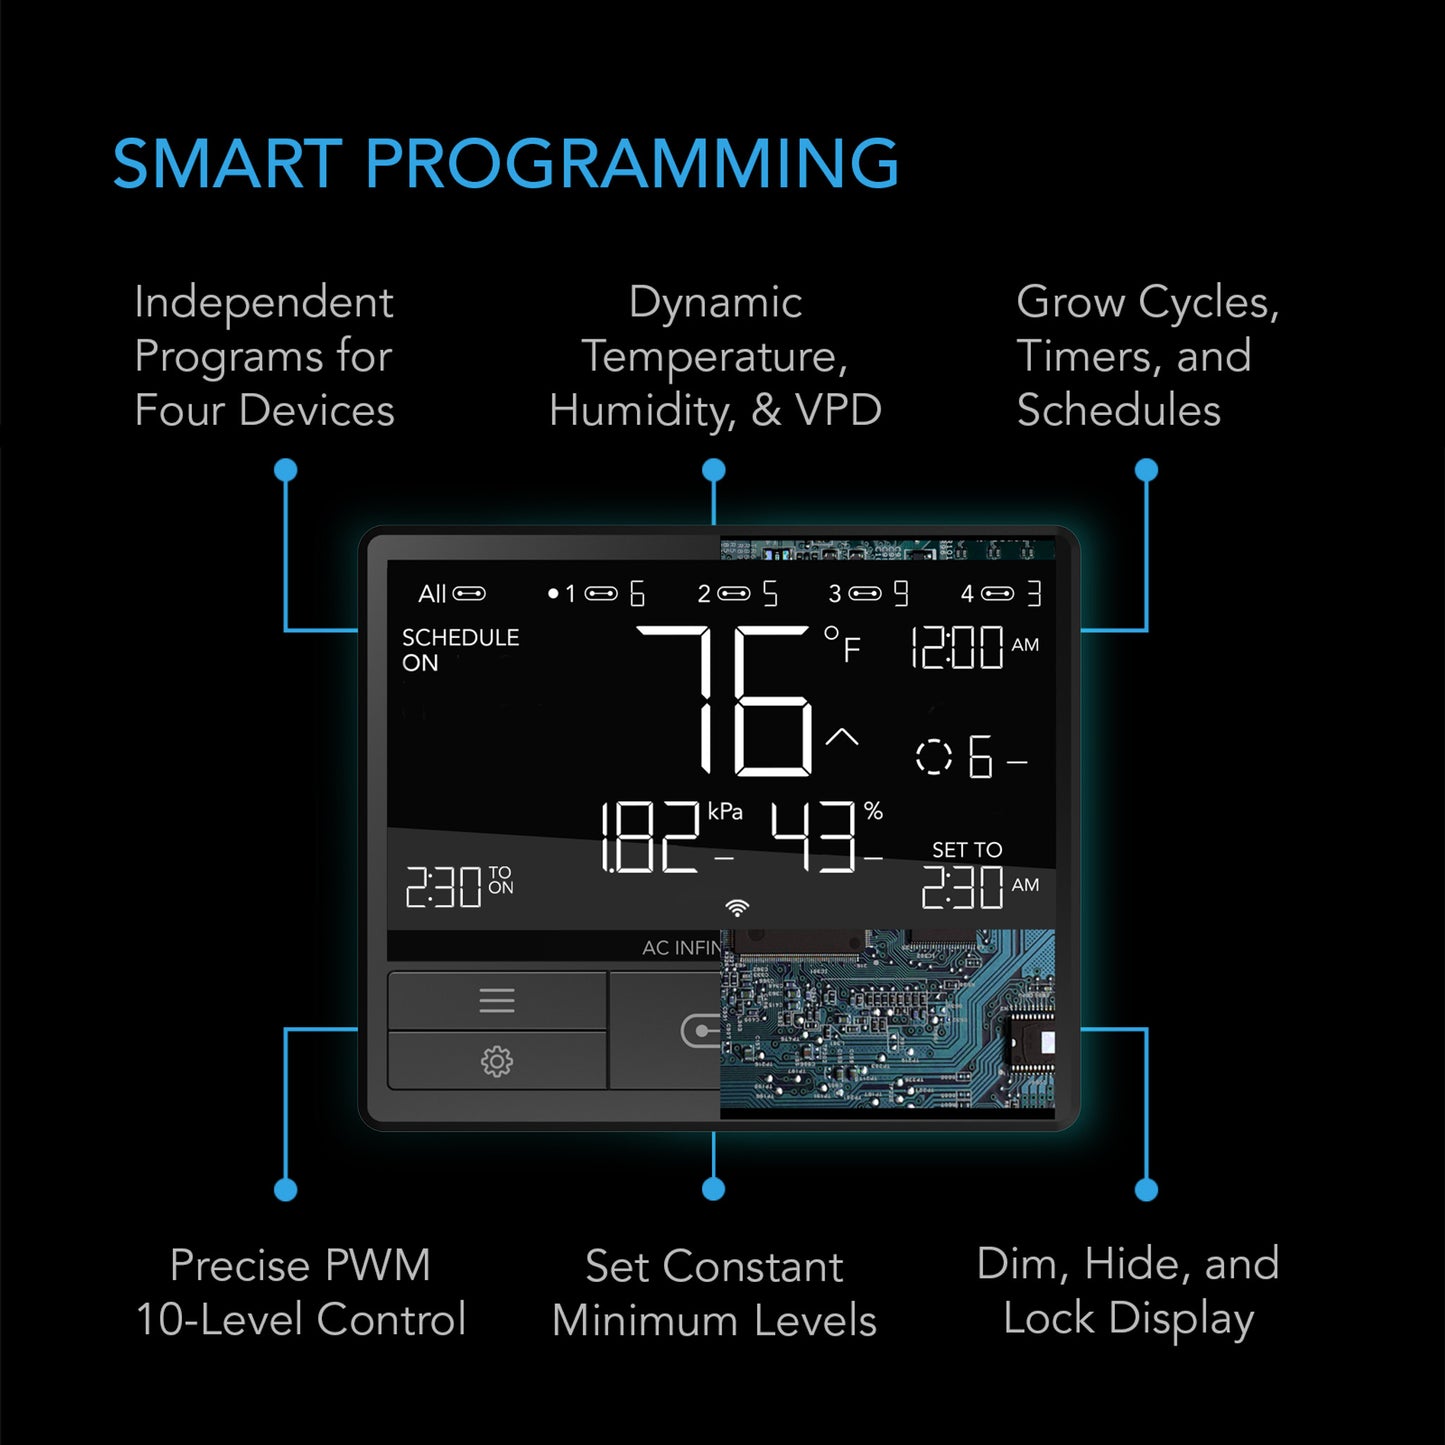 CONTROLLER 69 PRO, INDEPENDENT PROGRAMS FOR FOUR DEVICES, DYNAMIC VPD, TEMPERATURE, HUMIDITY, SCHEDULING, CYCLES, LEVELS CONTROL, DATA APP, BLUETOOTH + WIFI